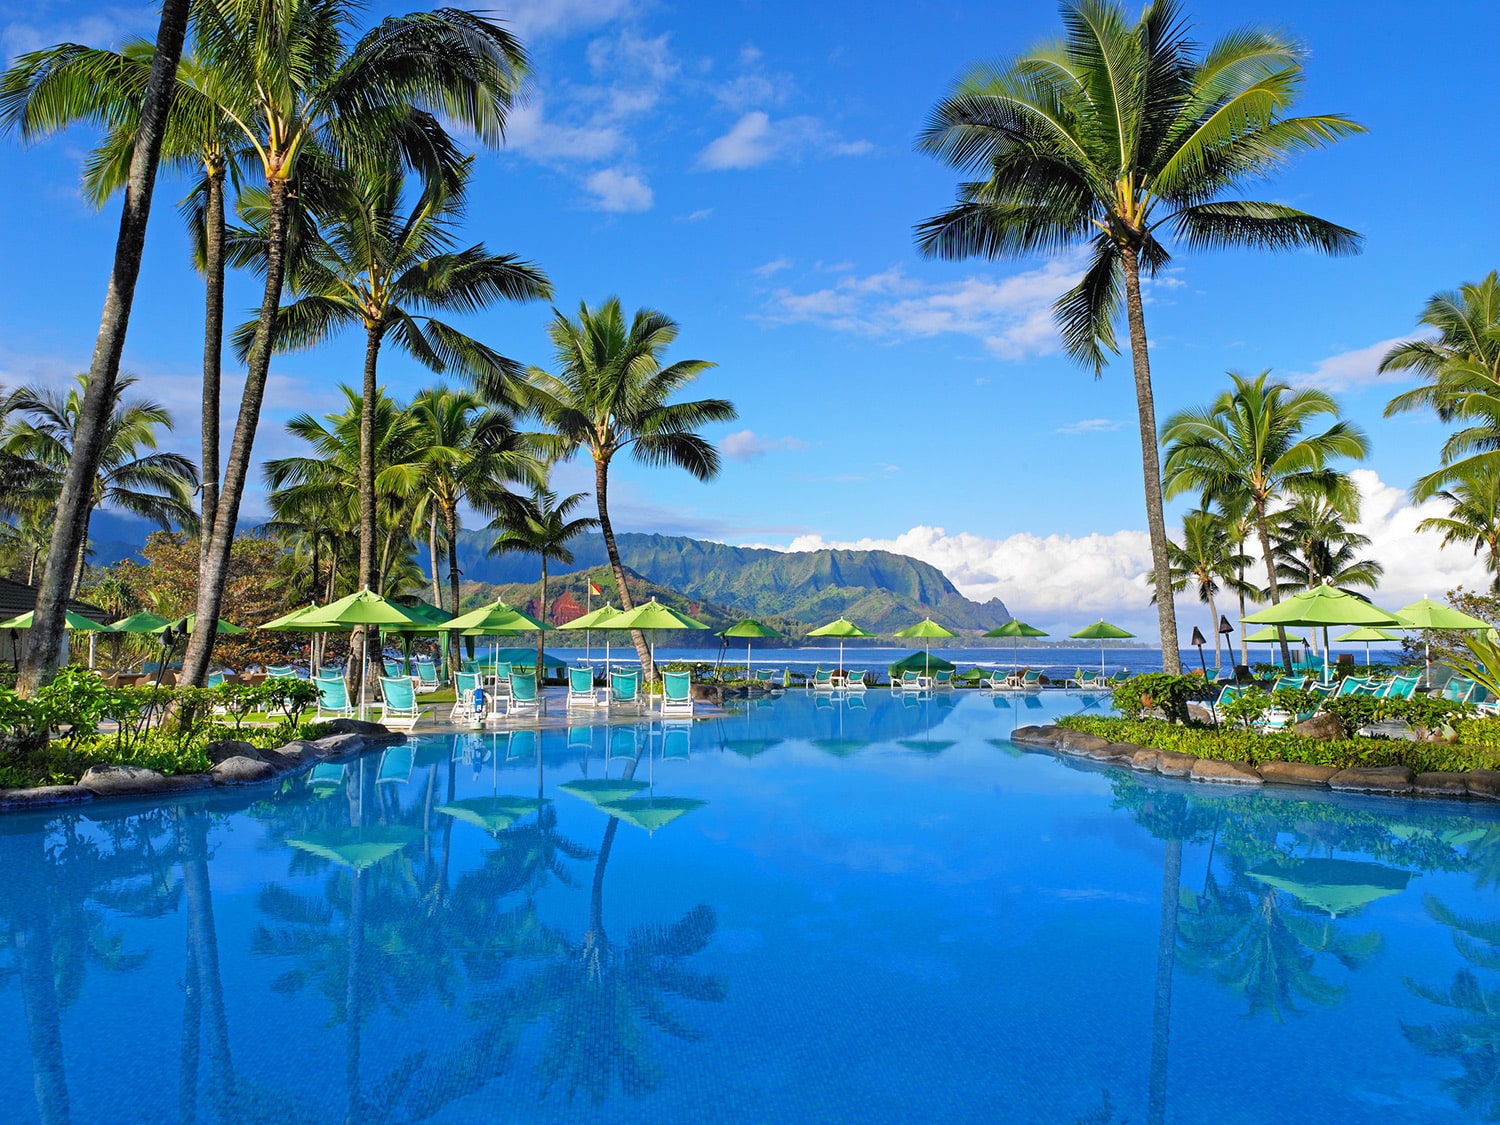 The pool at Princeville Resort